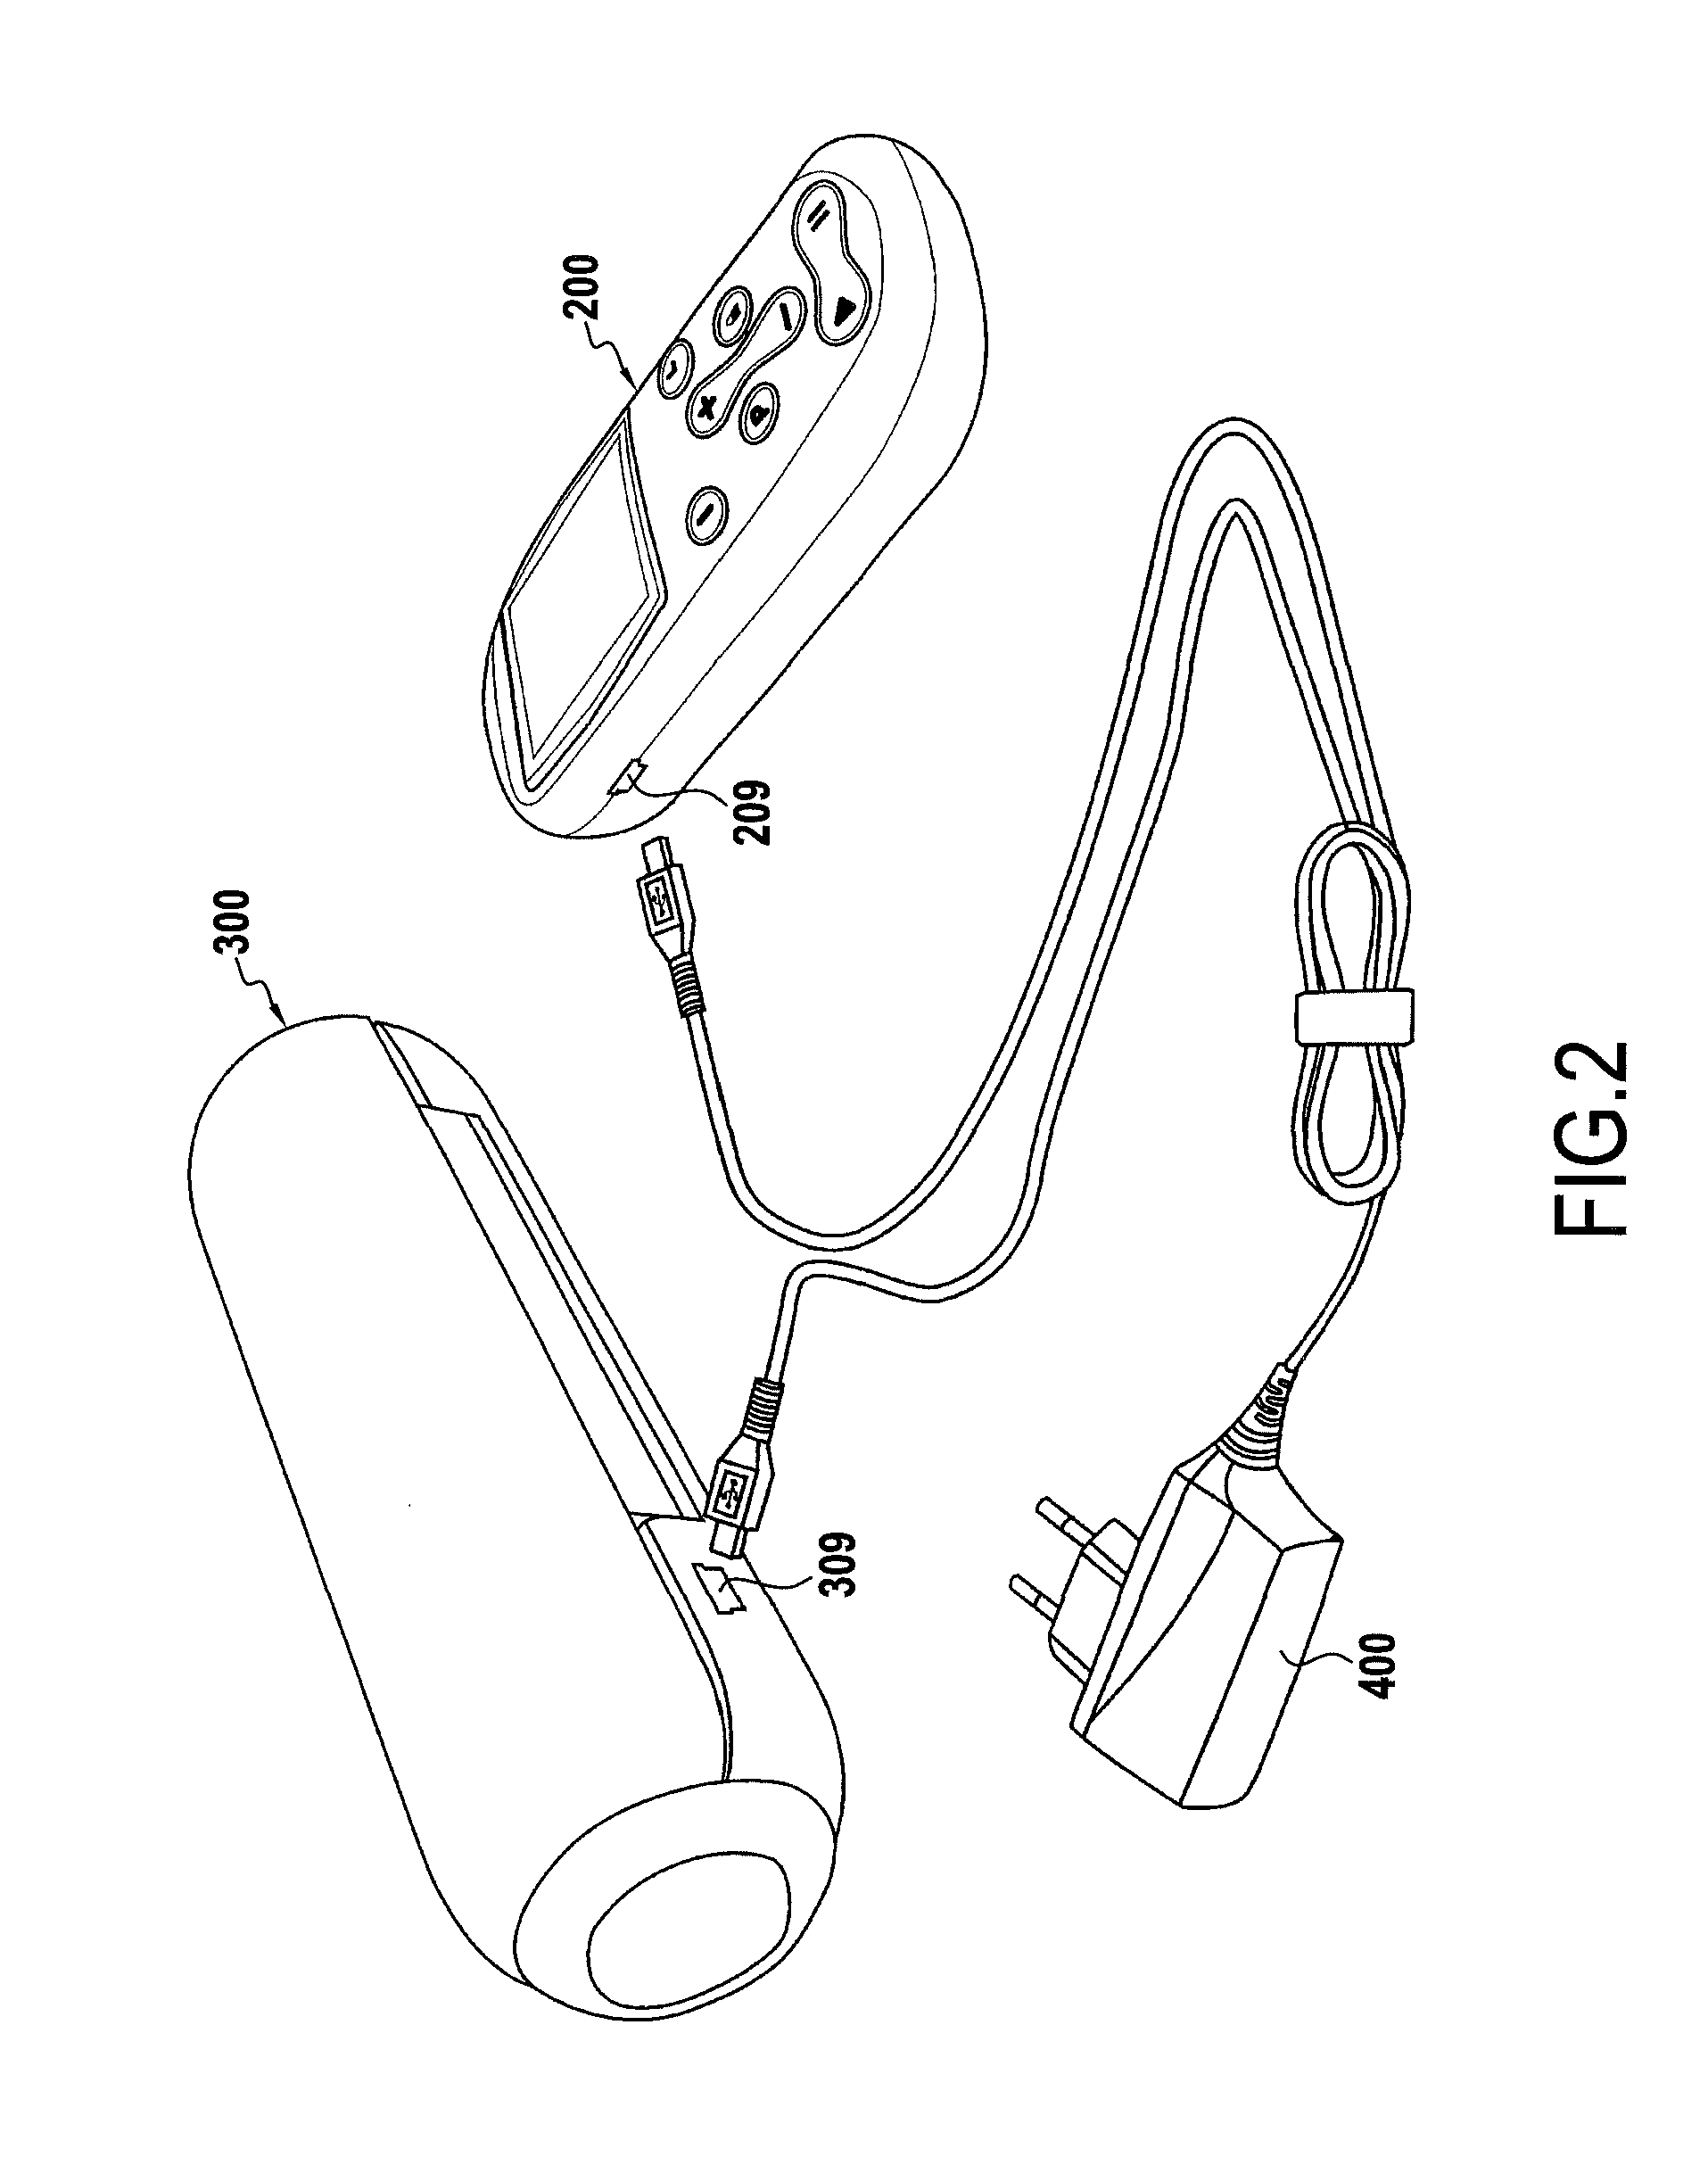 Device for perineum reeducation